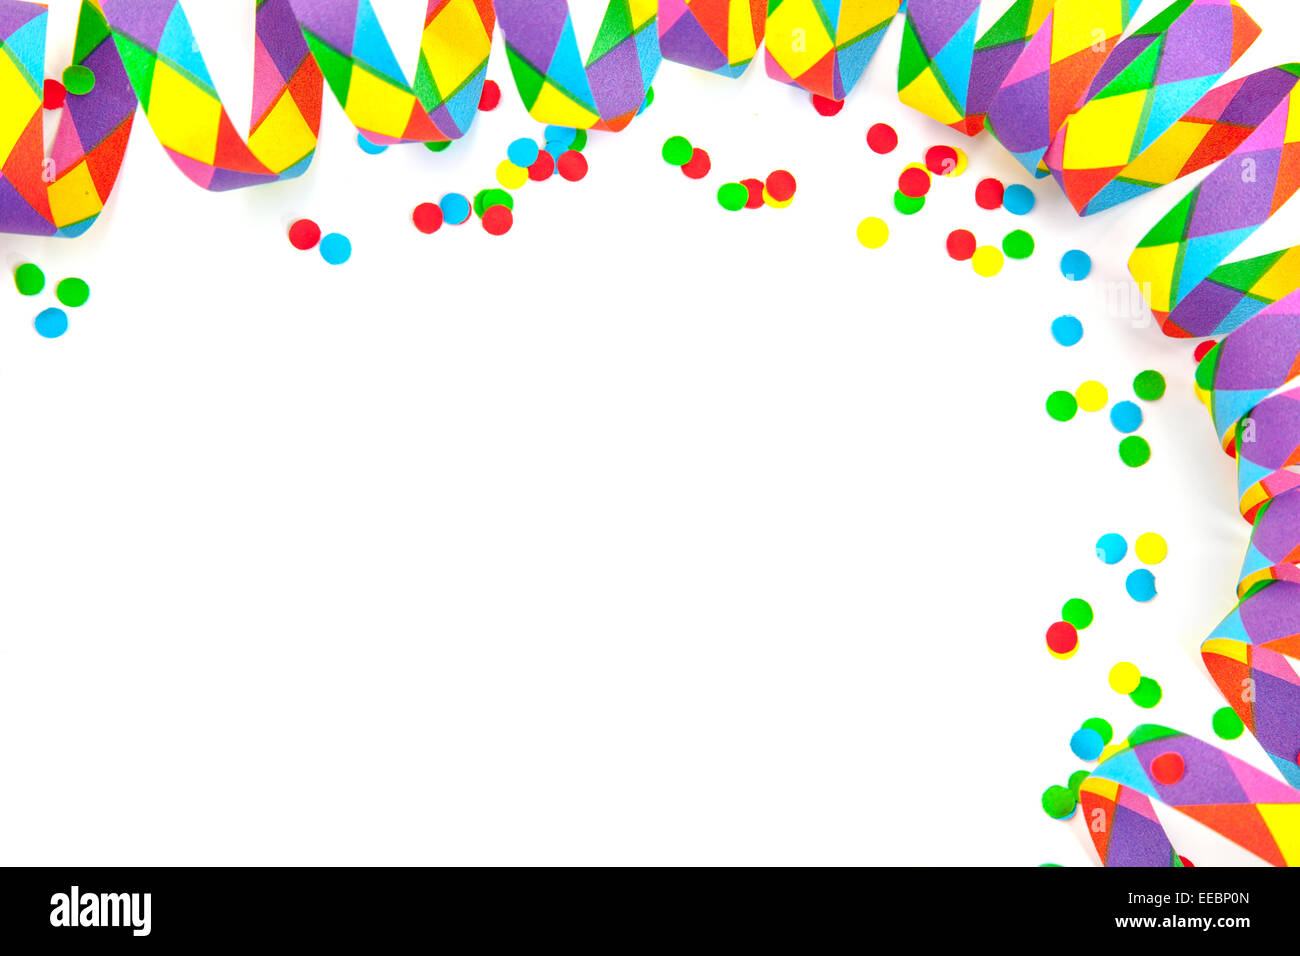 Confetti and party streamer on white background Stock Photo